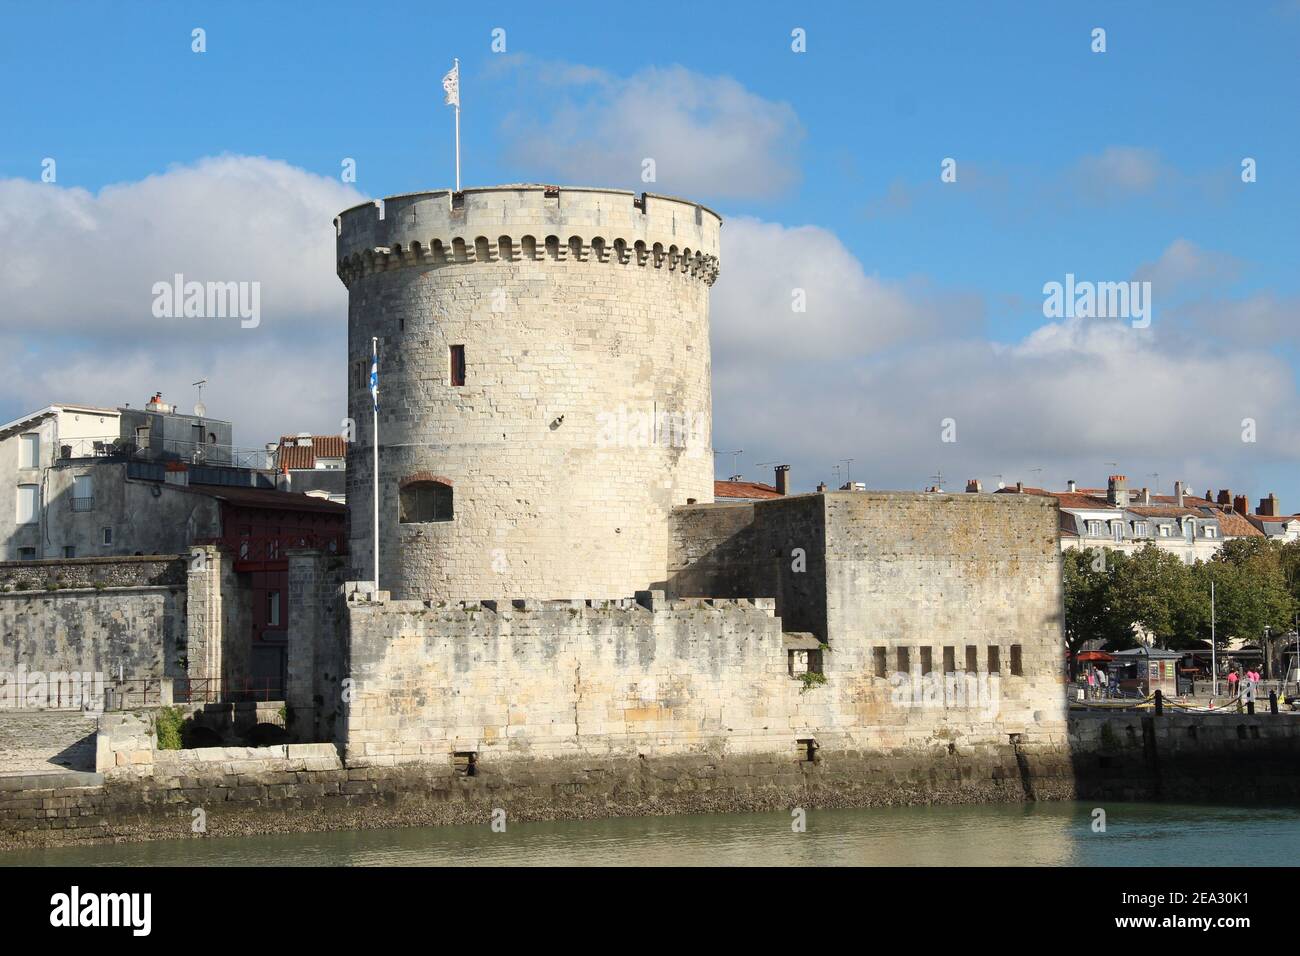 The Chain Tower in La Rochelle, France Stock Photo